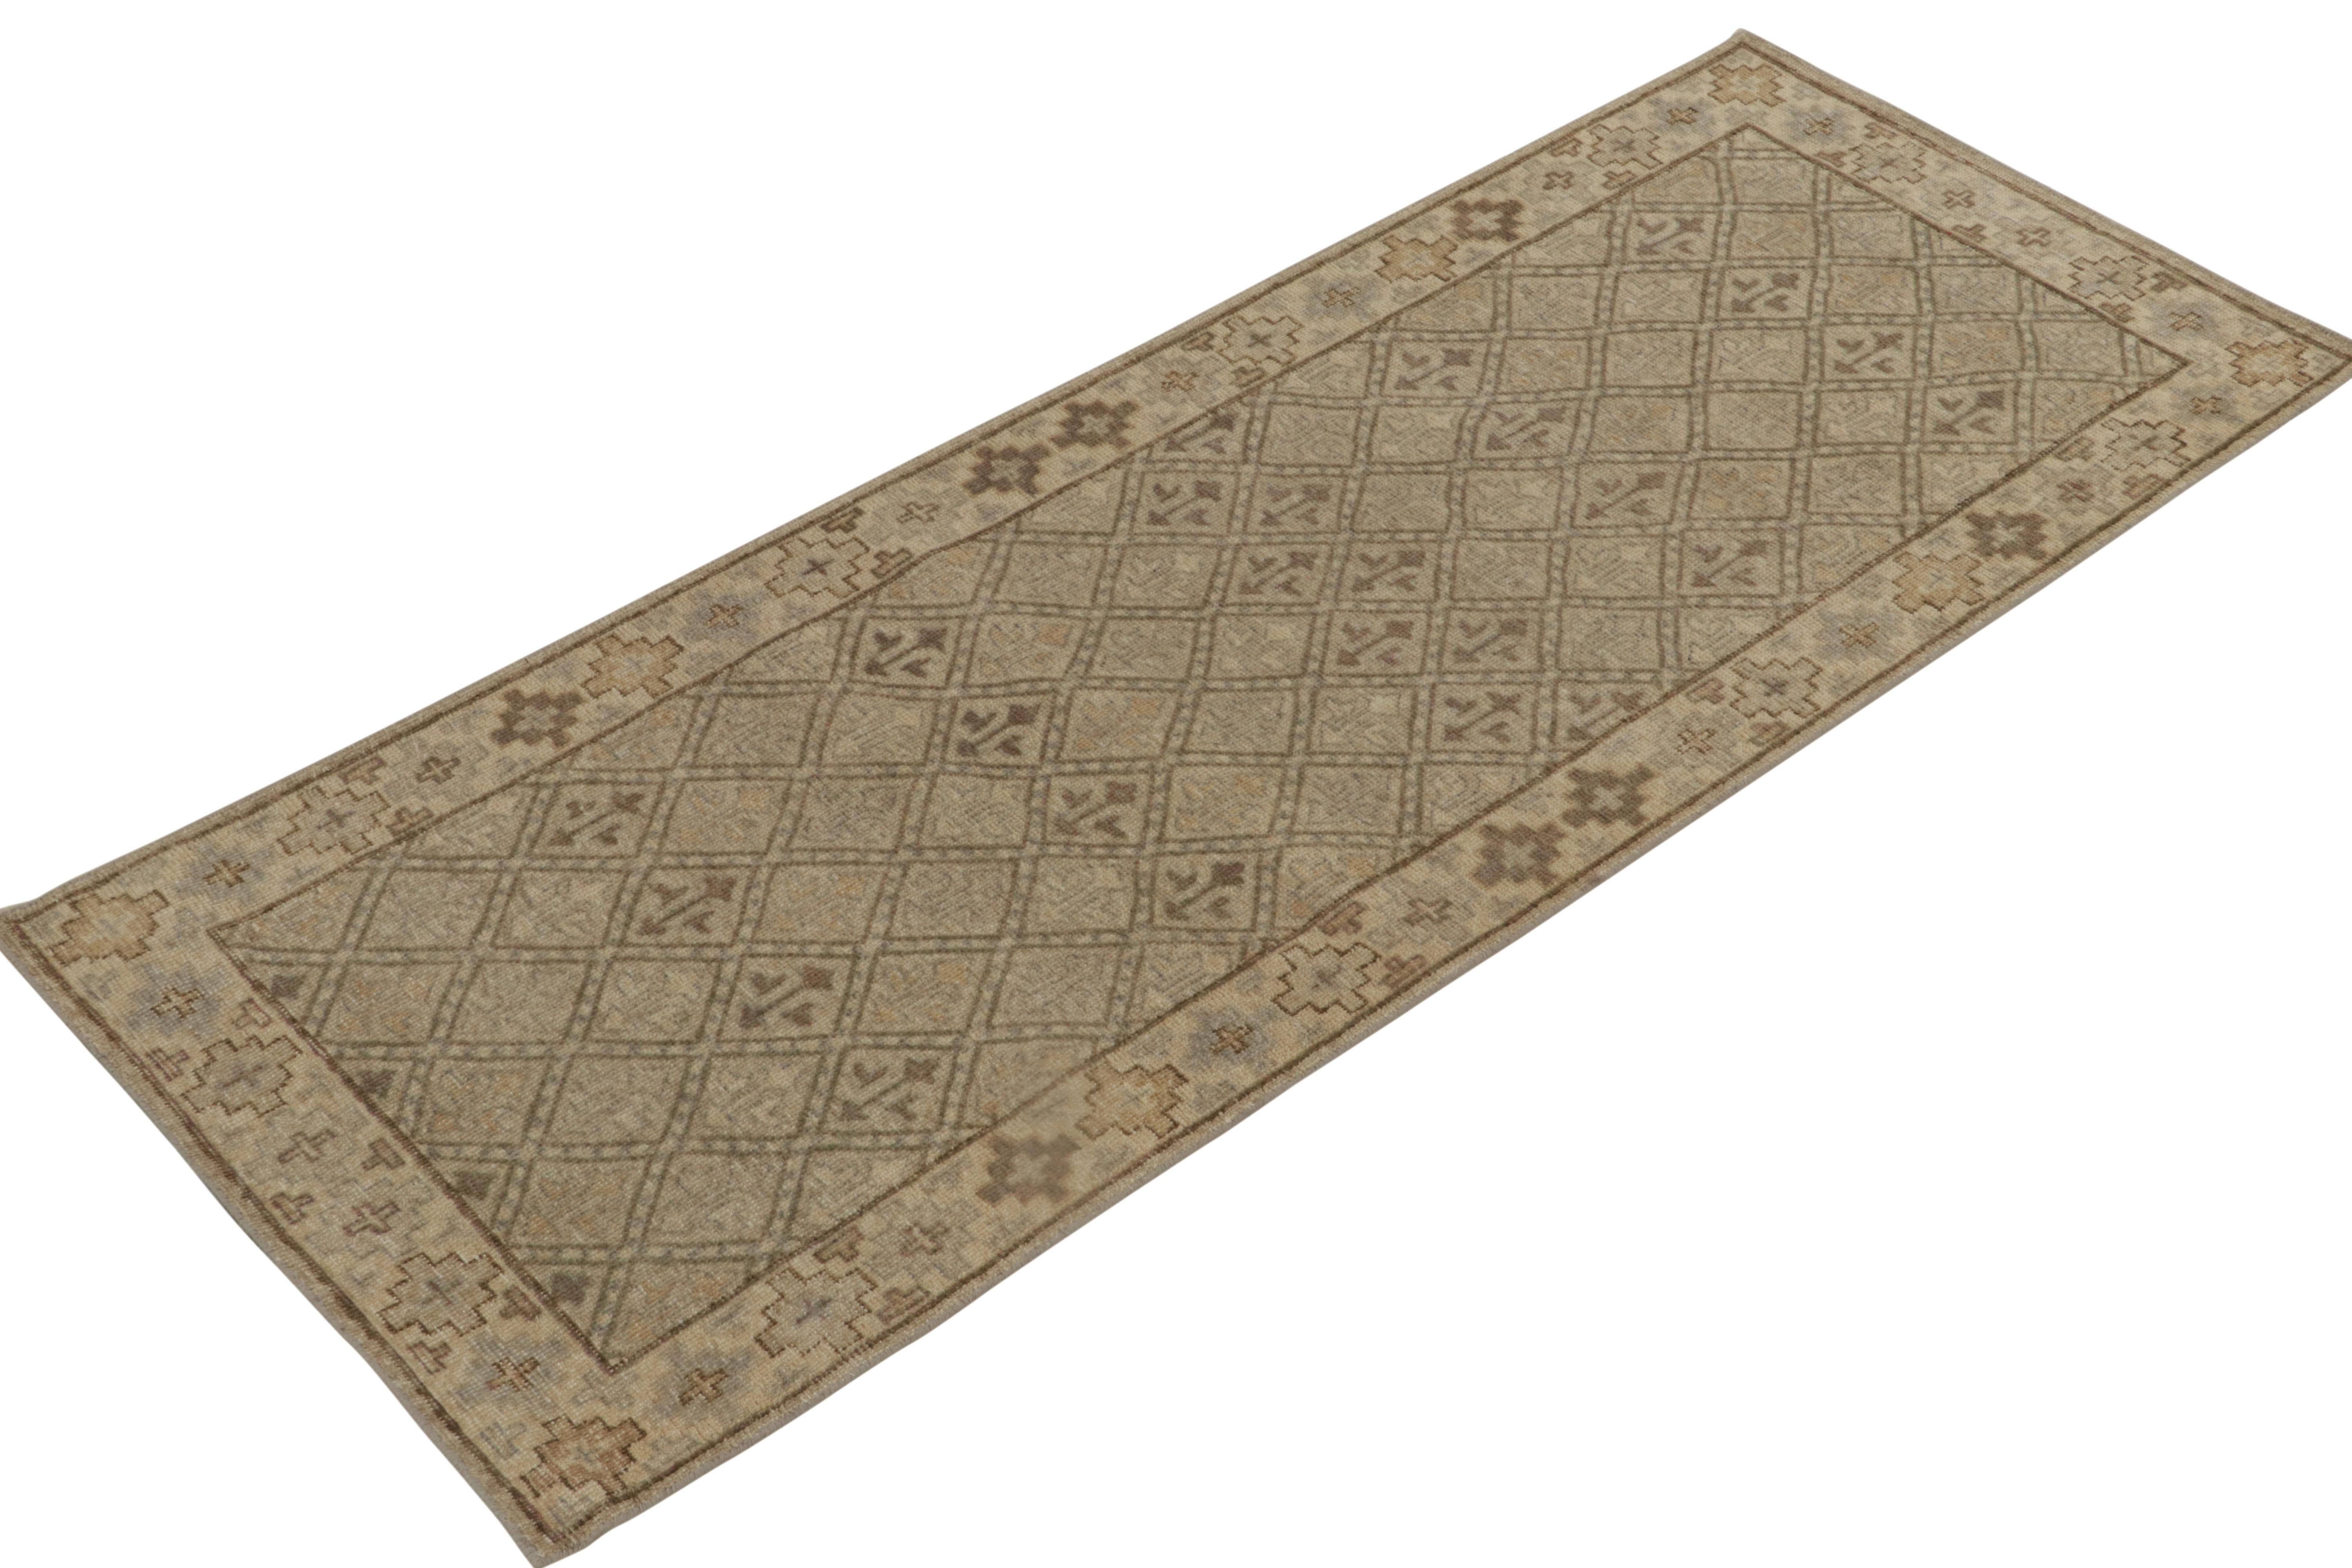 A 3x8 hand-knotted wool runner from Rug & Kilim’s Homage Collection; a vital new encyclopedia of style and texture.

On the Design: This rug is inspired by antique tribal patterns of a very forgiving provenance, recaptured in muted beige-brown and